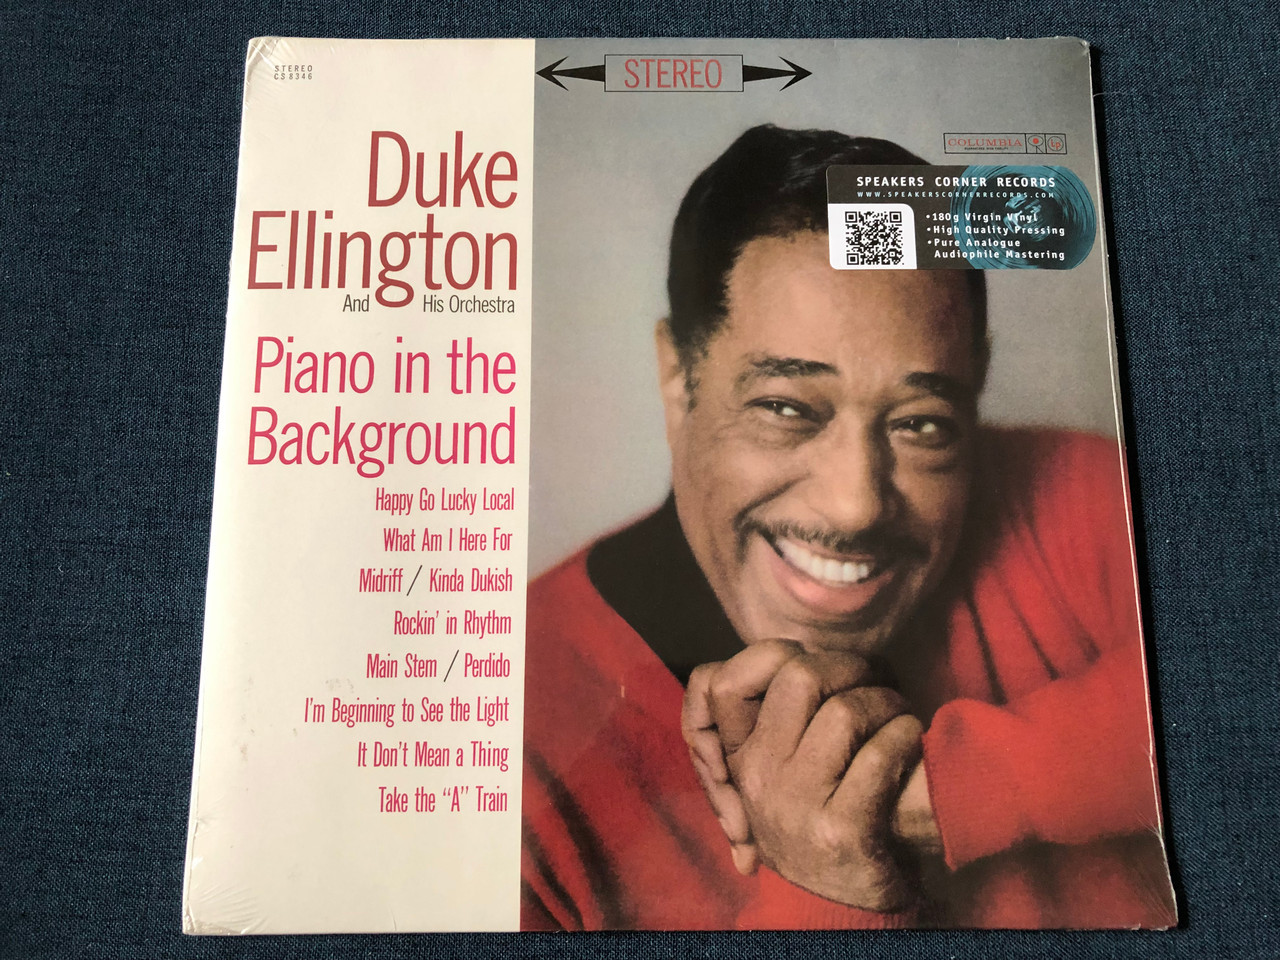 Duke Ellington And His Orchestra – Piano In The Background / Happy Go Lucky  Local; What Am I